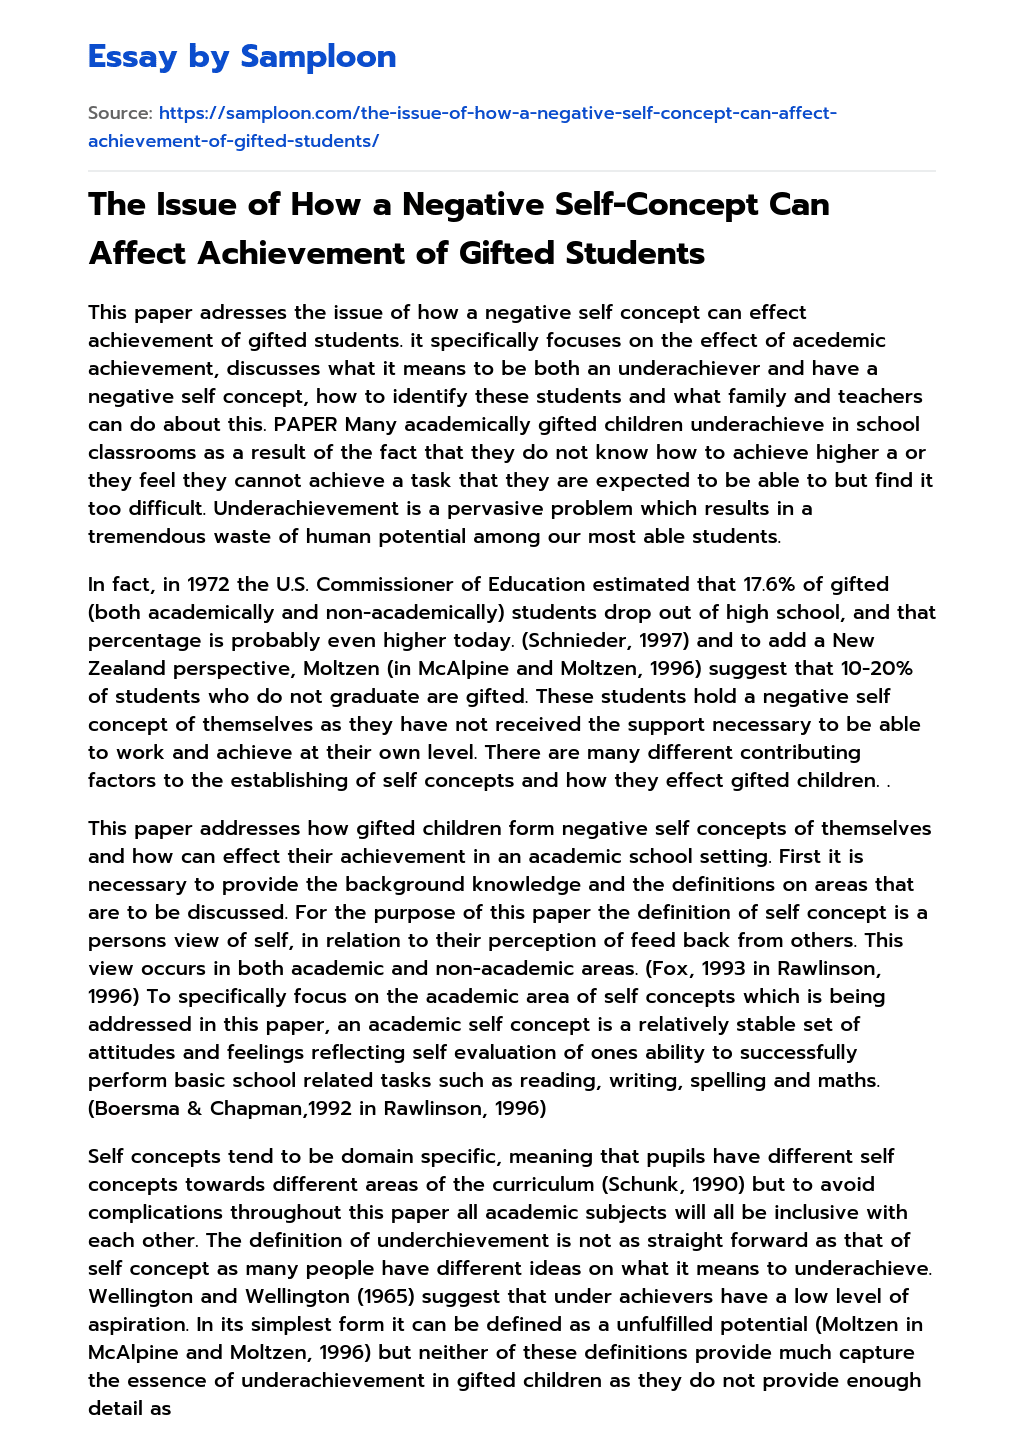 The Issue of How a Negative Self-Concept Can Affect Achievement of Gifted Students essay